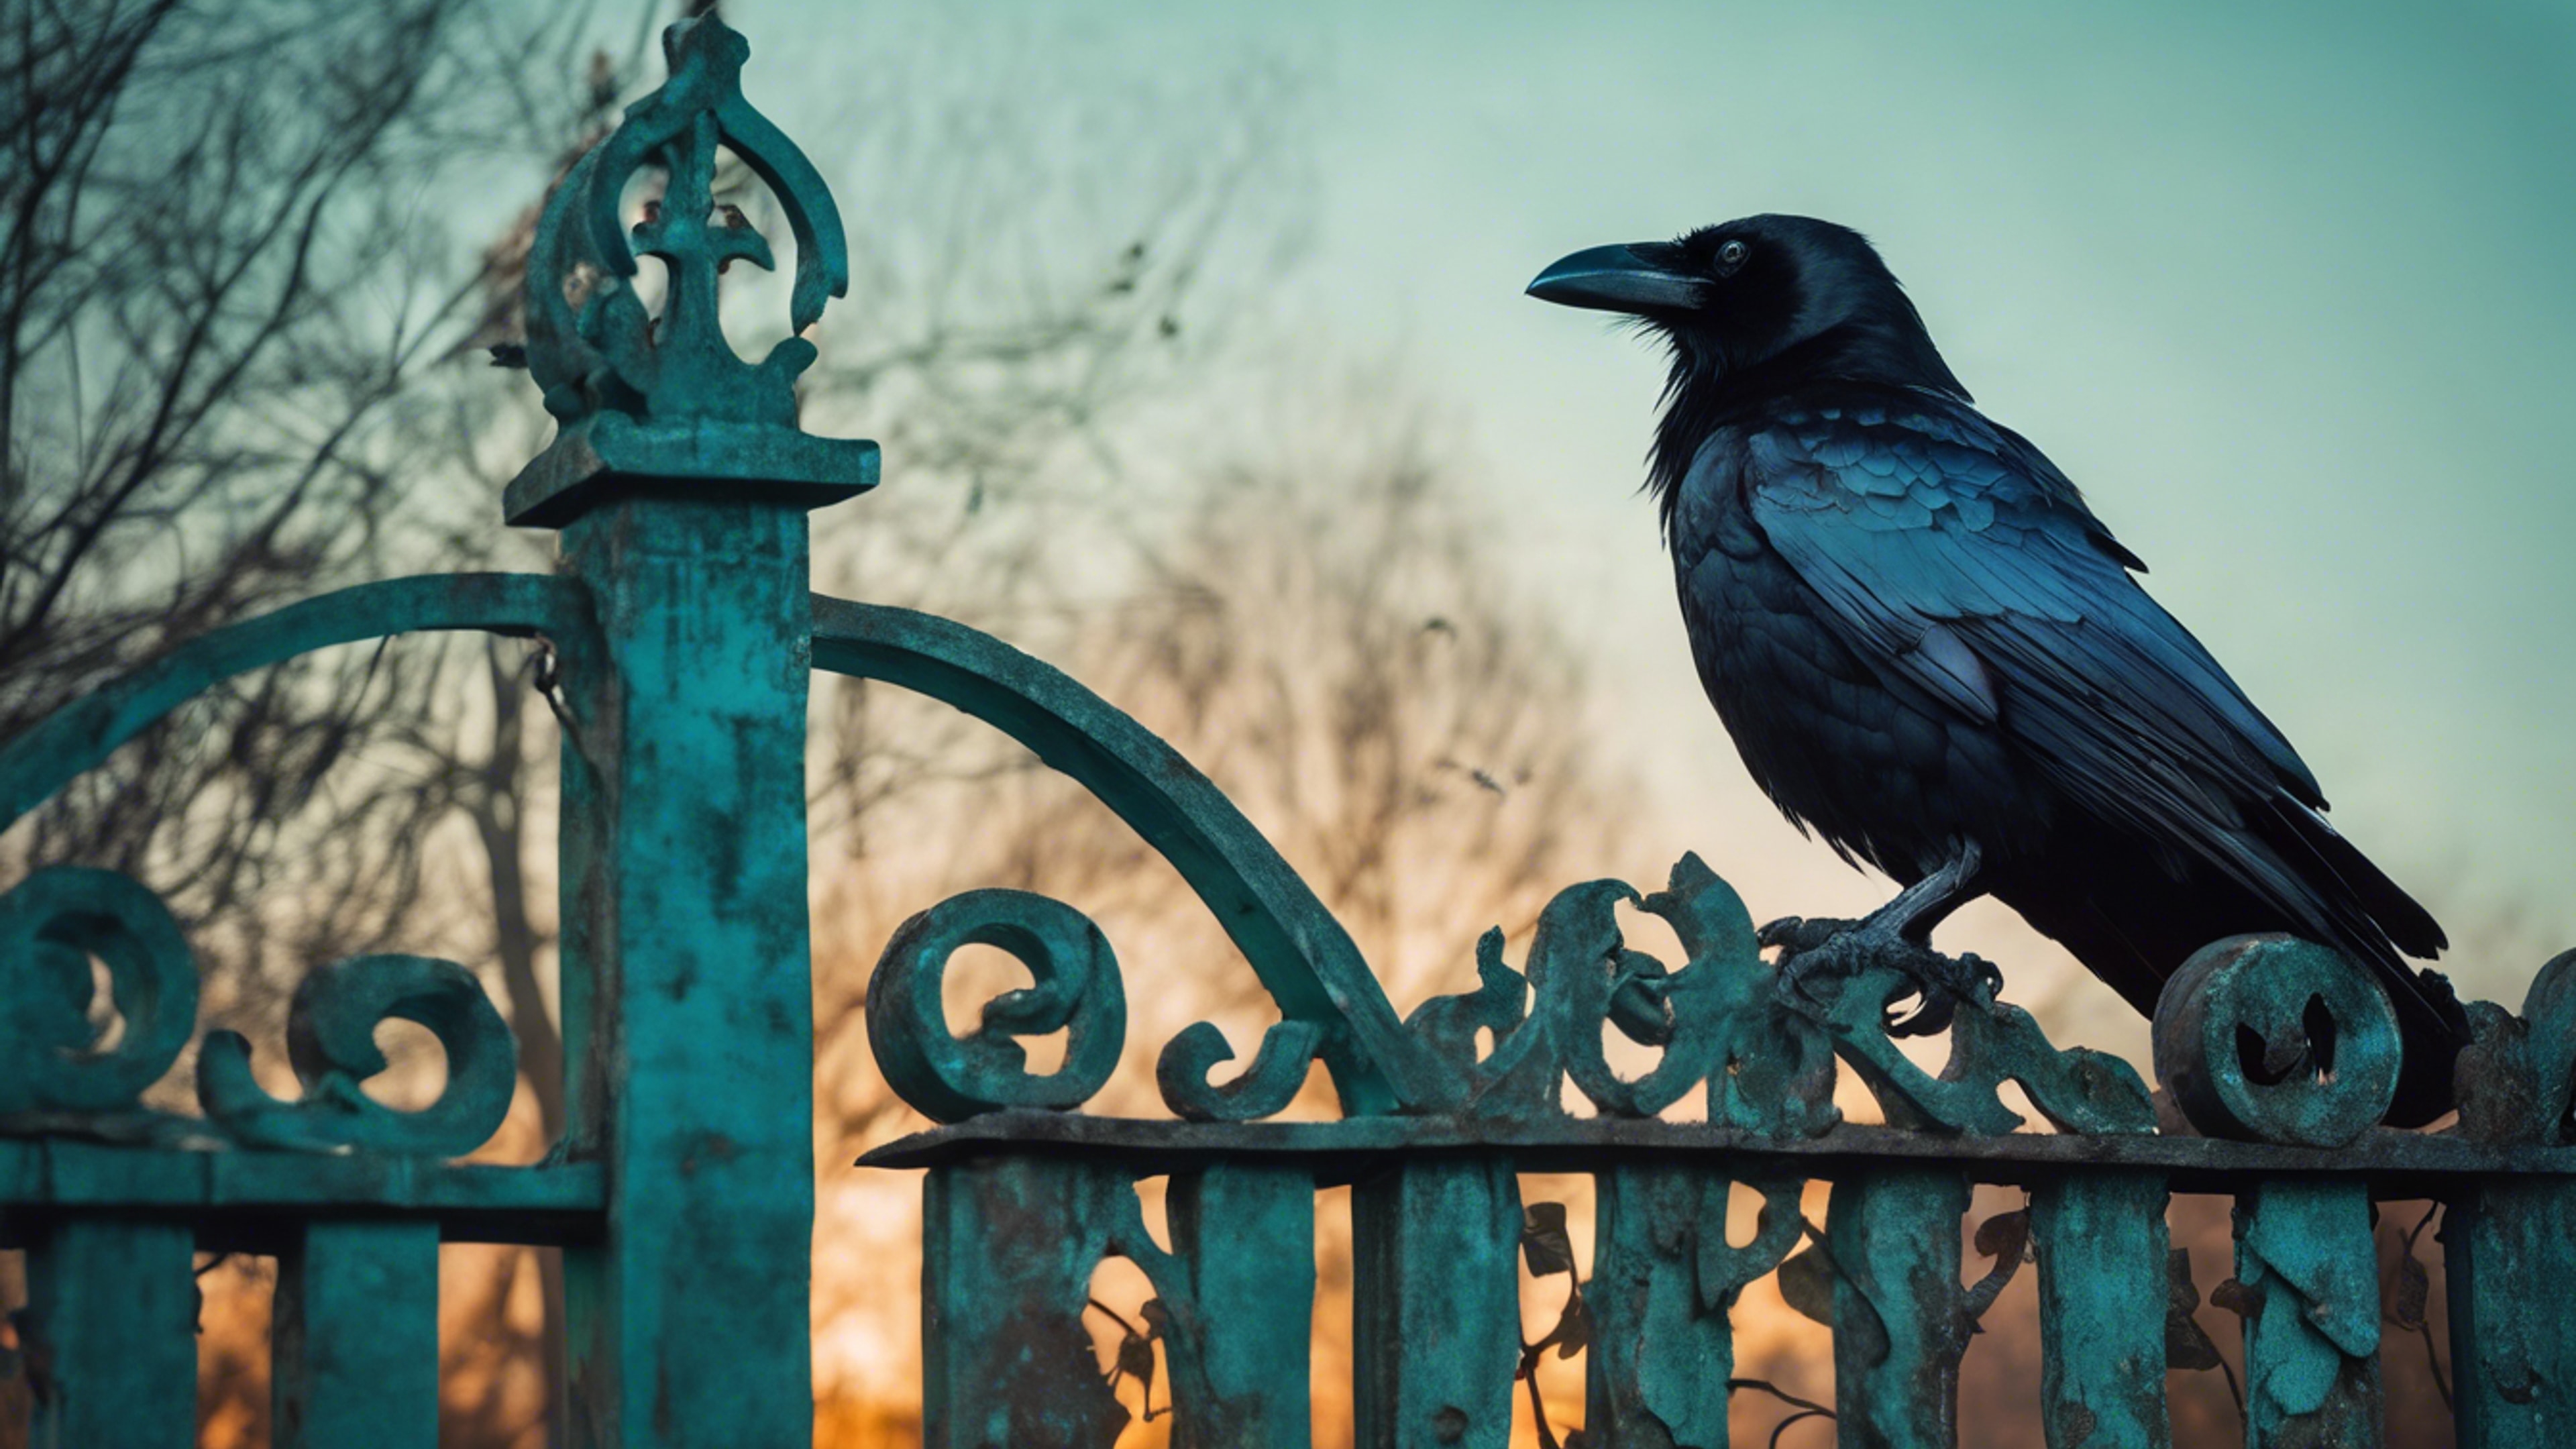 A Gothic raven perched on a dilapidated garden gate, aglow with the mesmerizing light of a teal moon. 벽지[c5fc313733614ce1ad34]